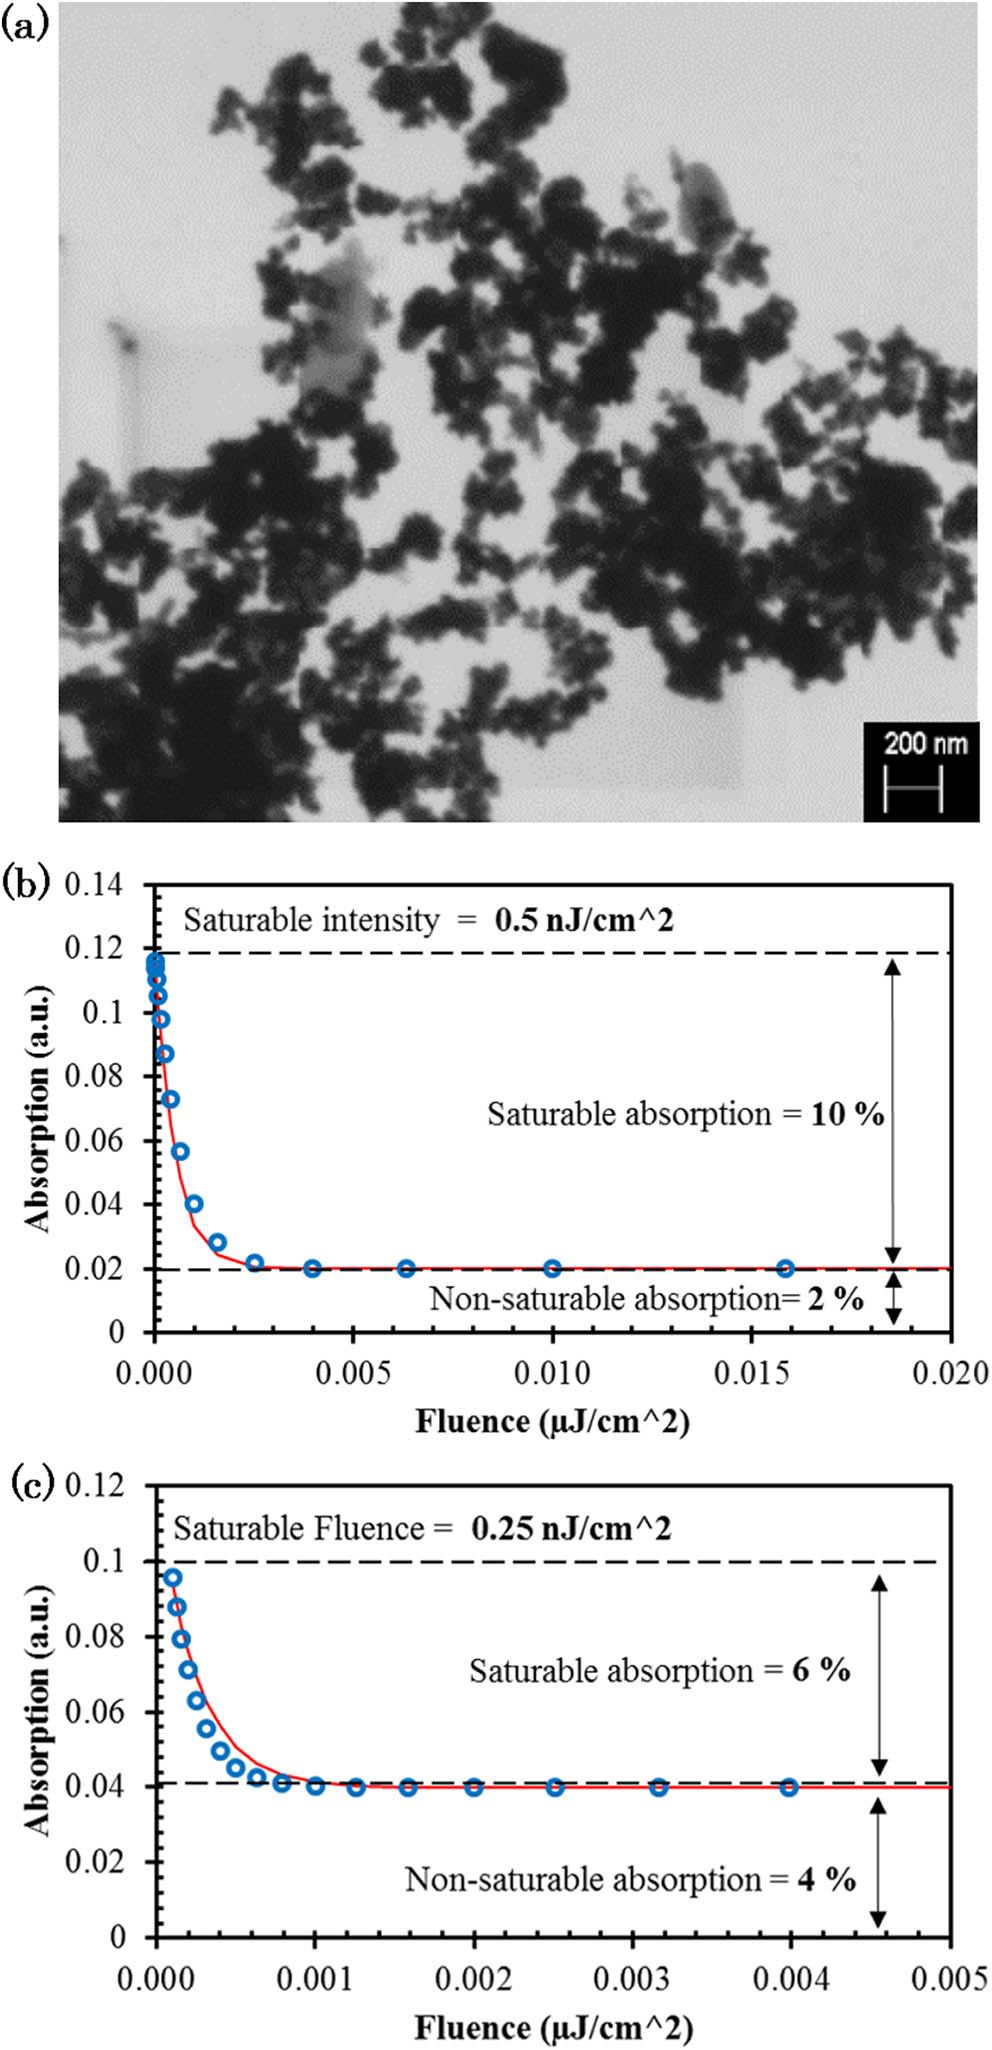 Characteristic of Mn-doped CdSe, (a) STEM image in the nanometer scale, (b) the nonlinear absorption properties for five droplets, and (c) the nonlinear absorption properties for three droplets.